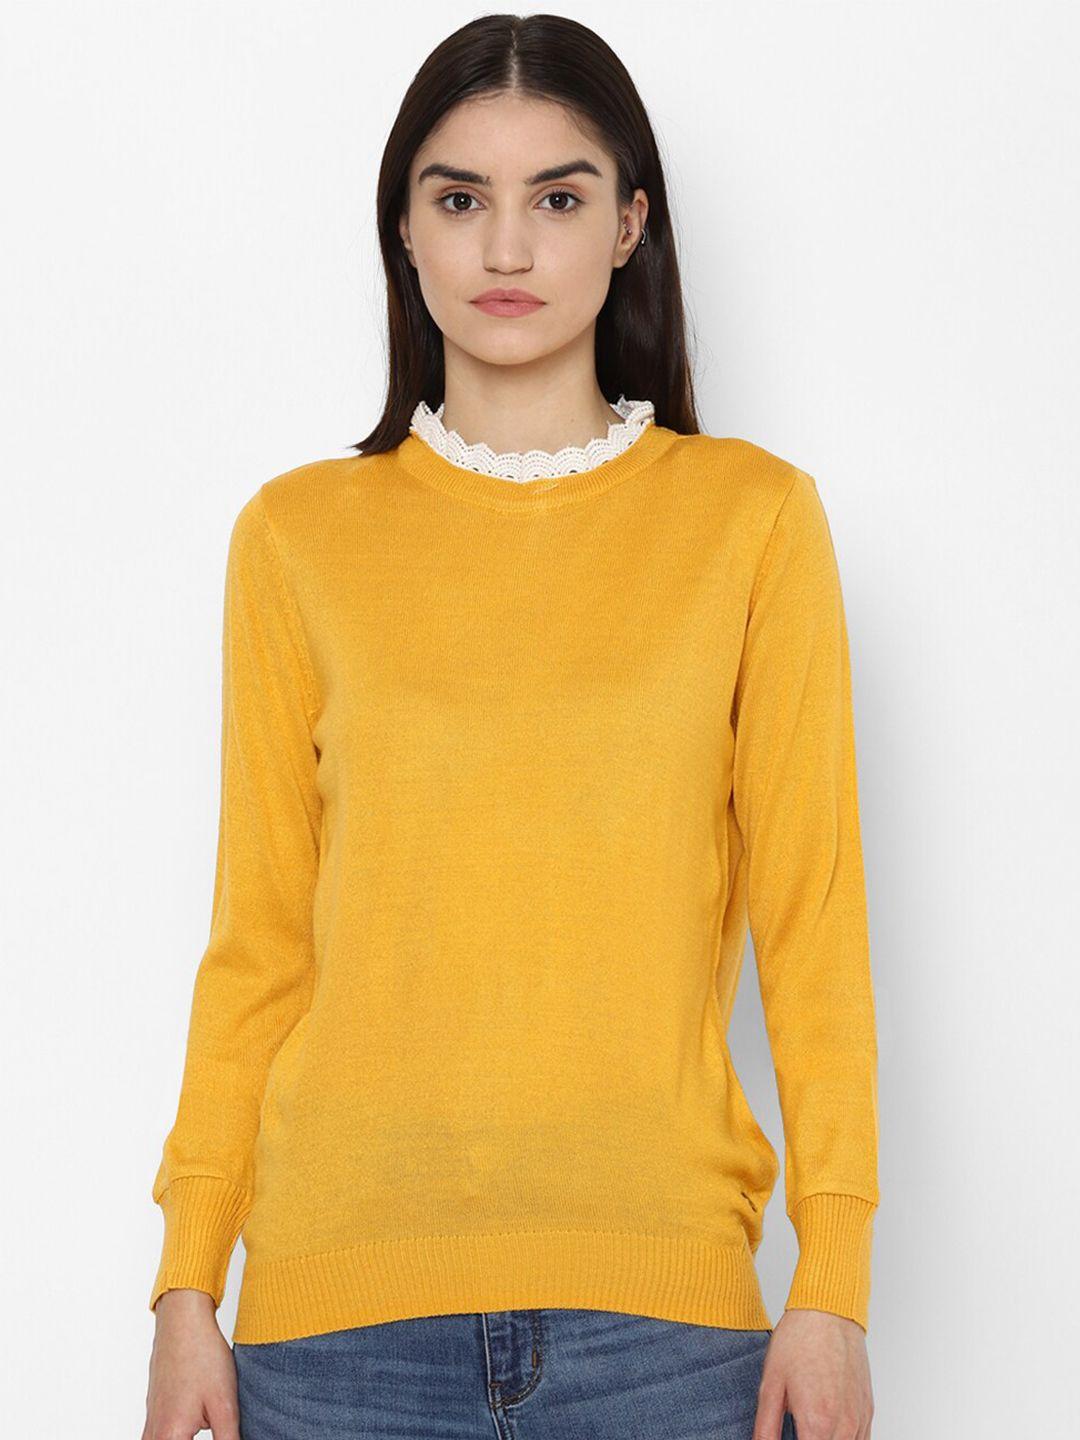 allen solly woman women yellow & white solid round neck pullover